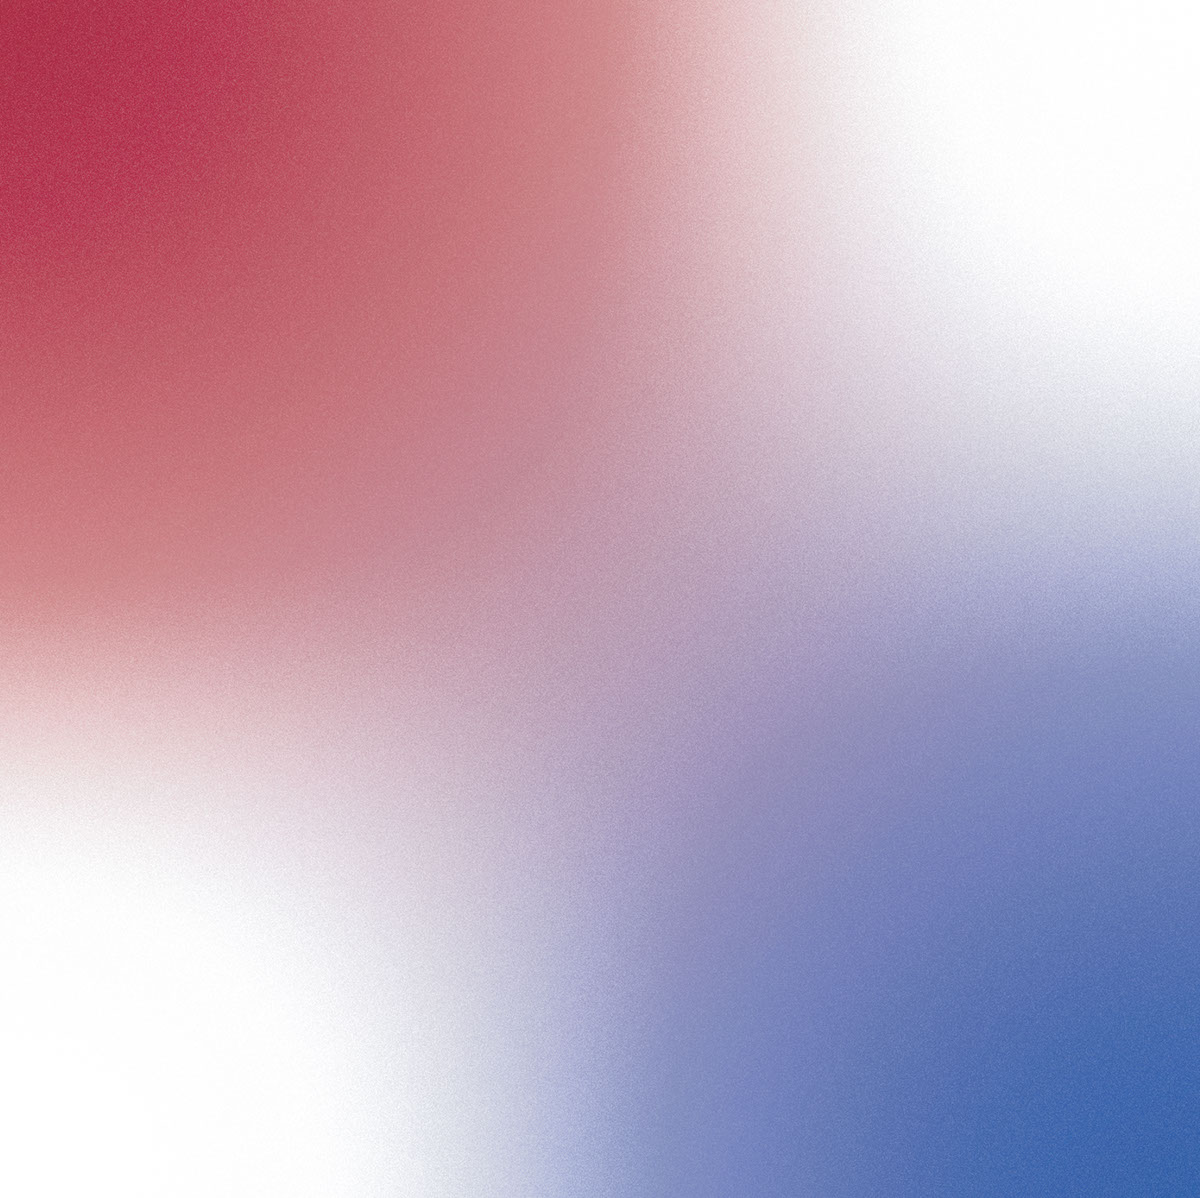 Red and Blue Gradient background rendition image